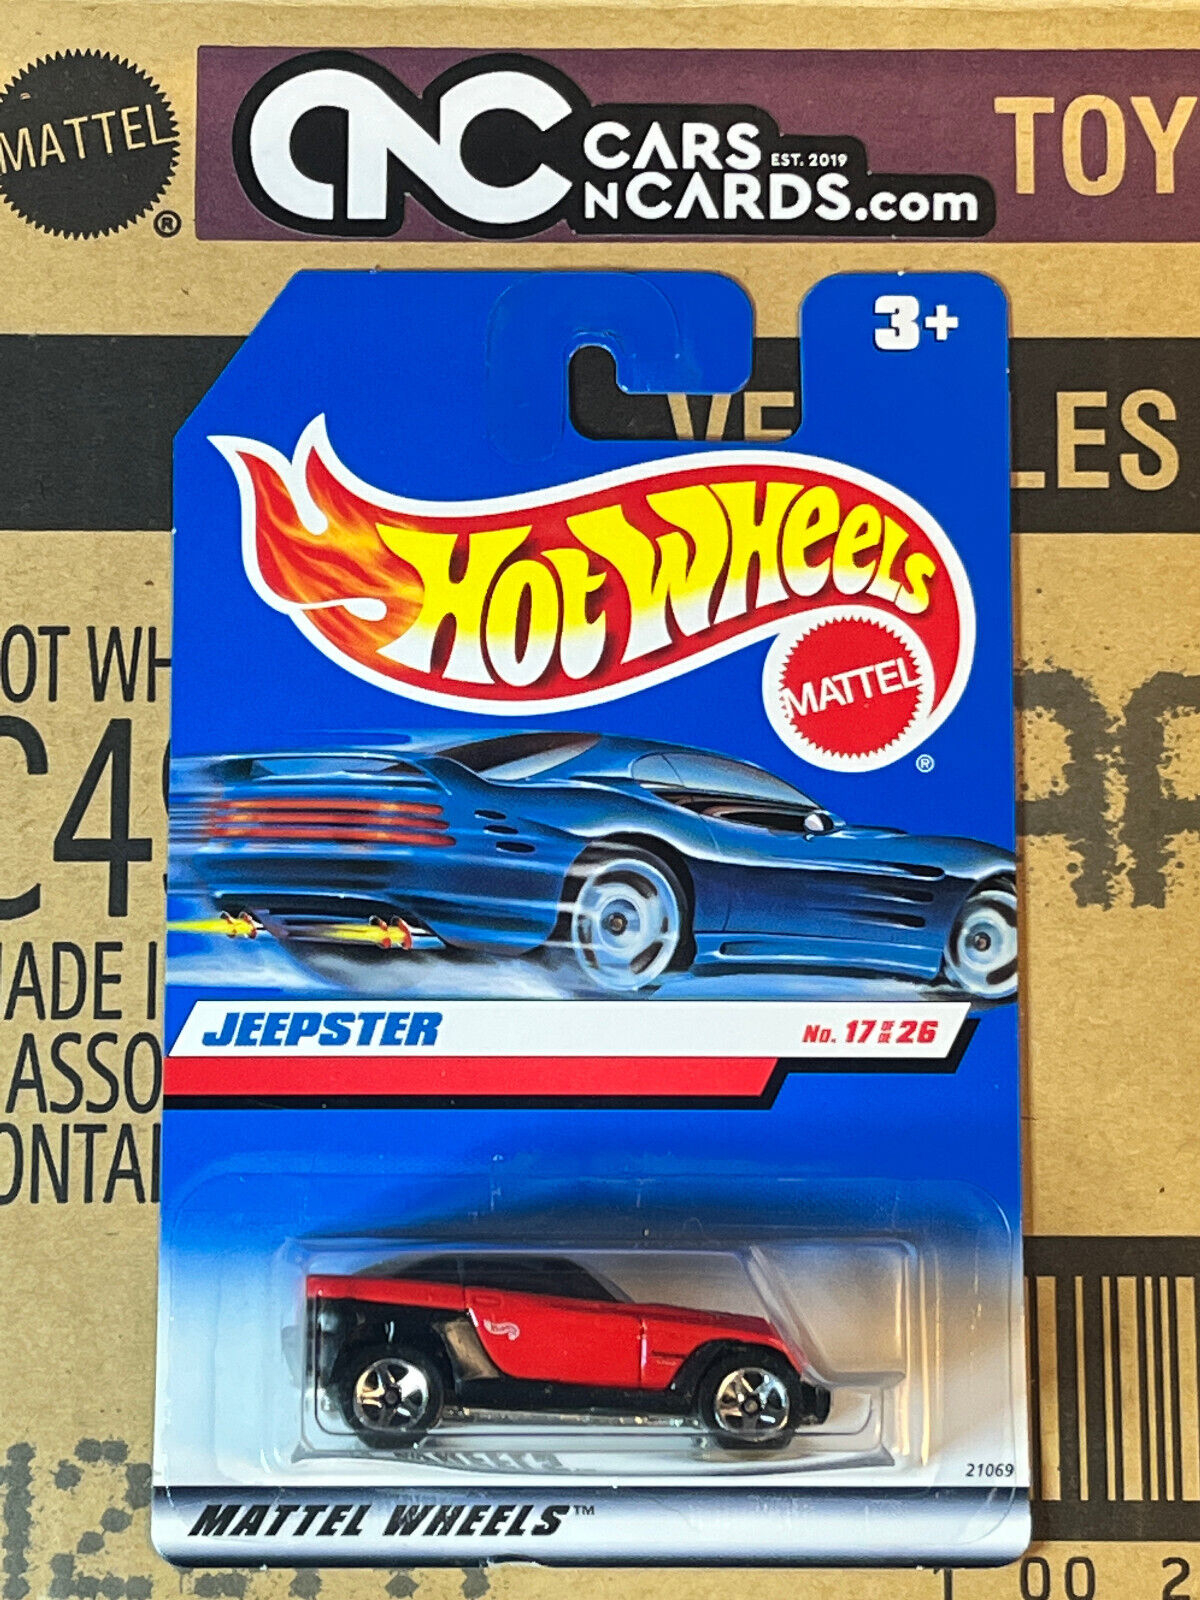 1999 Hot Wheels First Editions #17/26 Jeepster Red NIP